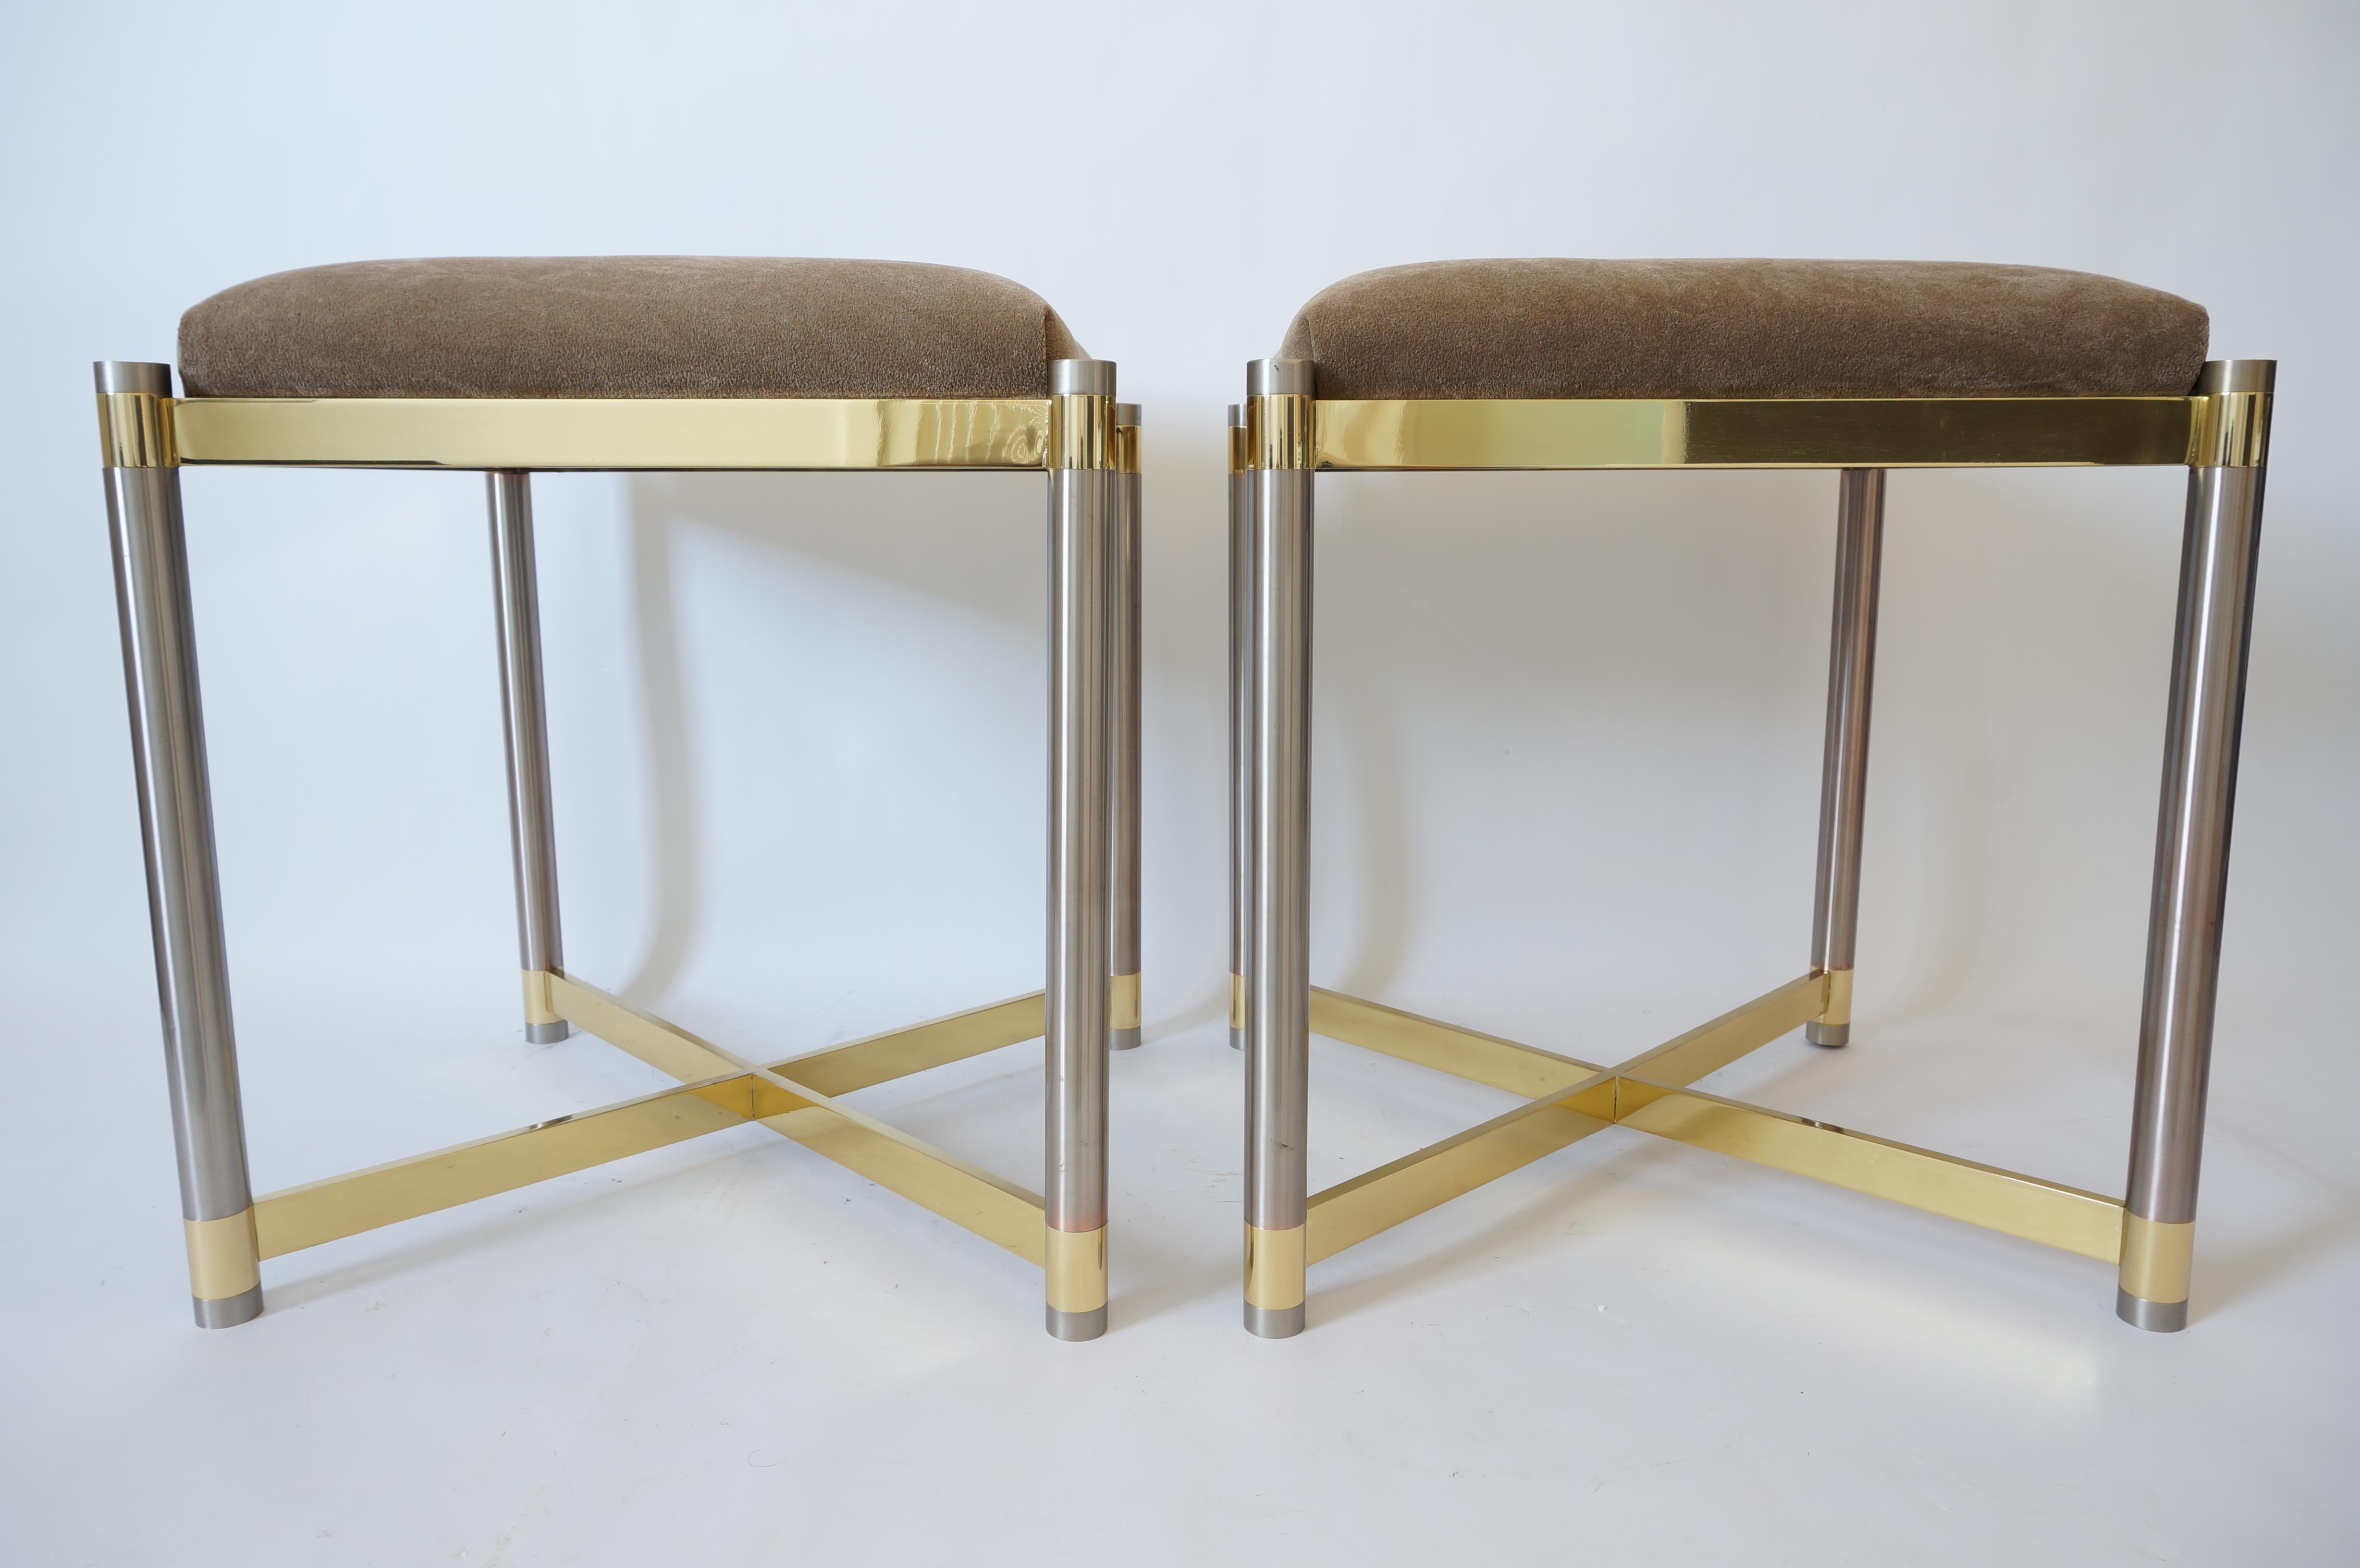 Pair of Benches in Stainless Steel and Brass Attributed to Maison Jansen 1